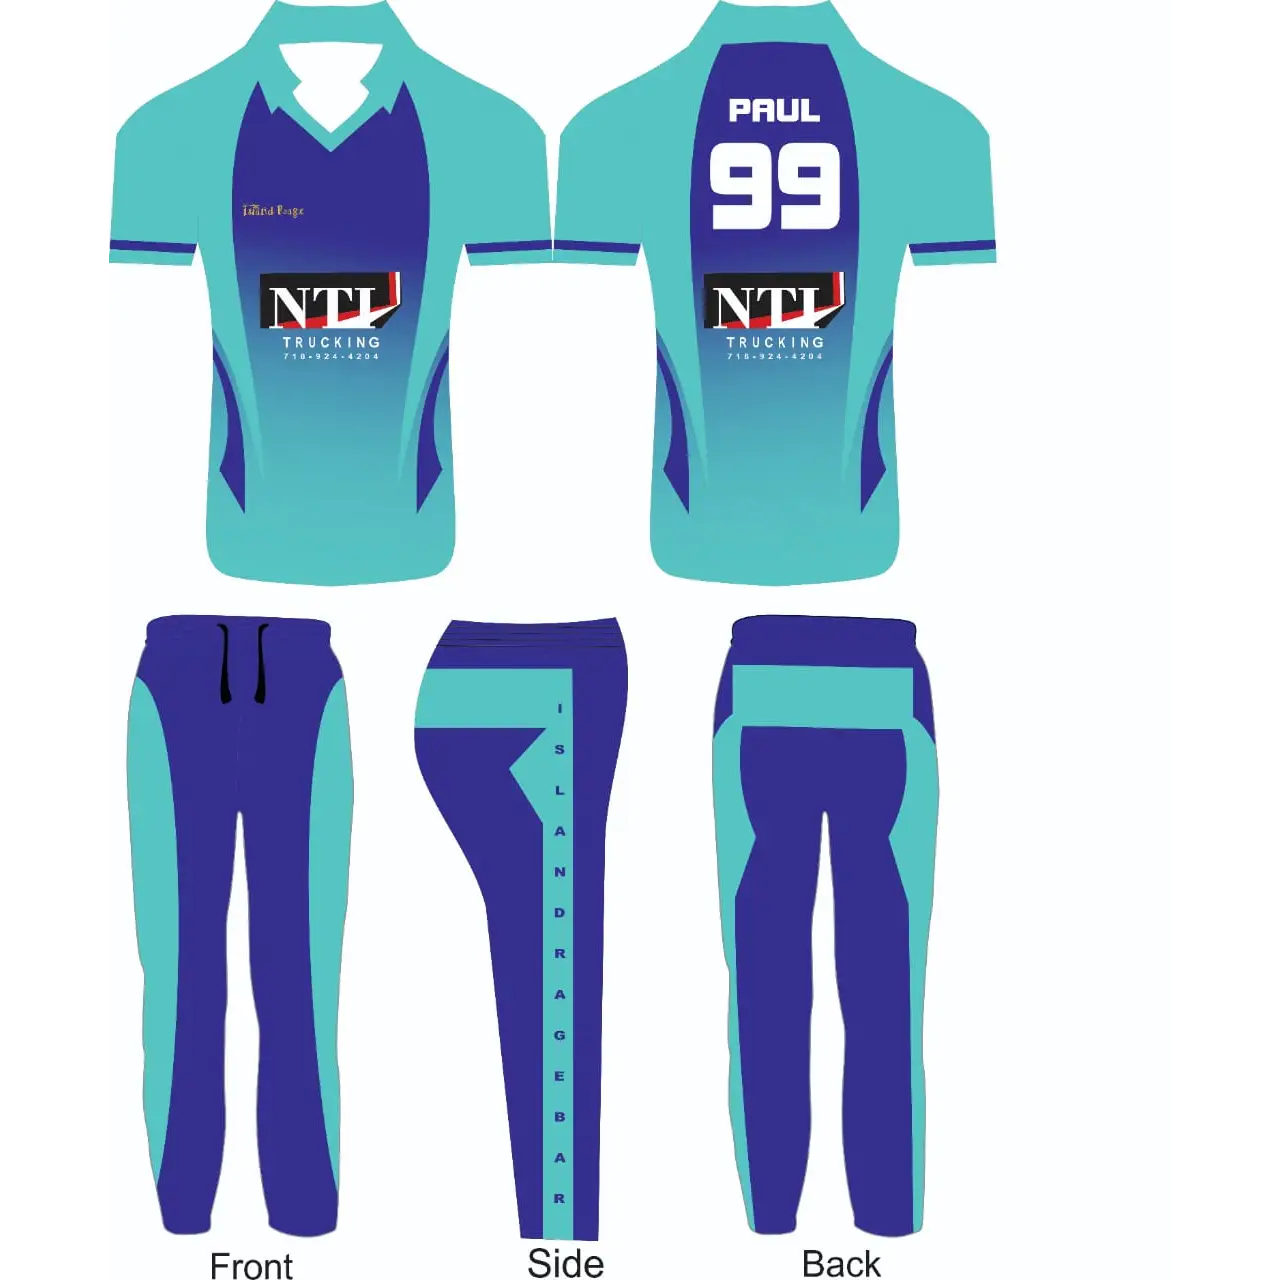 Cricket Shirt And Trouser Fully Customizable With Name And Number - Light And Dark Blue - Custom Cricket Wear 2PC Full